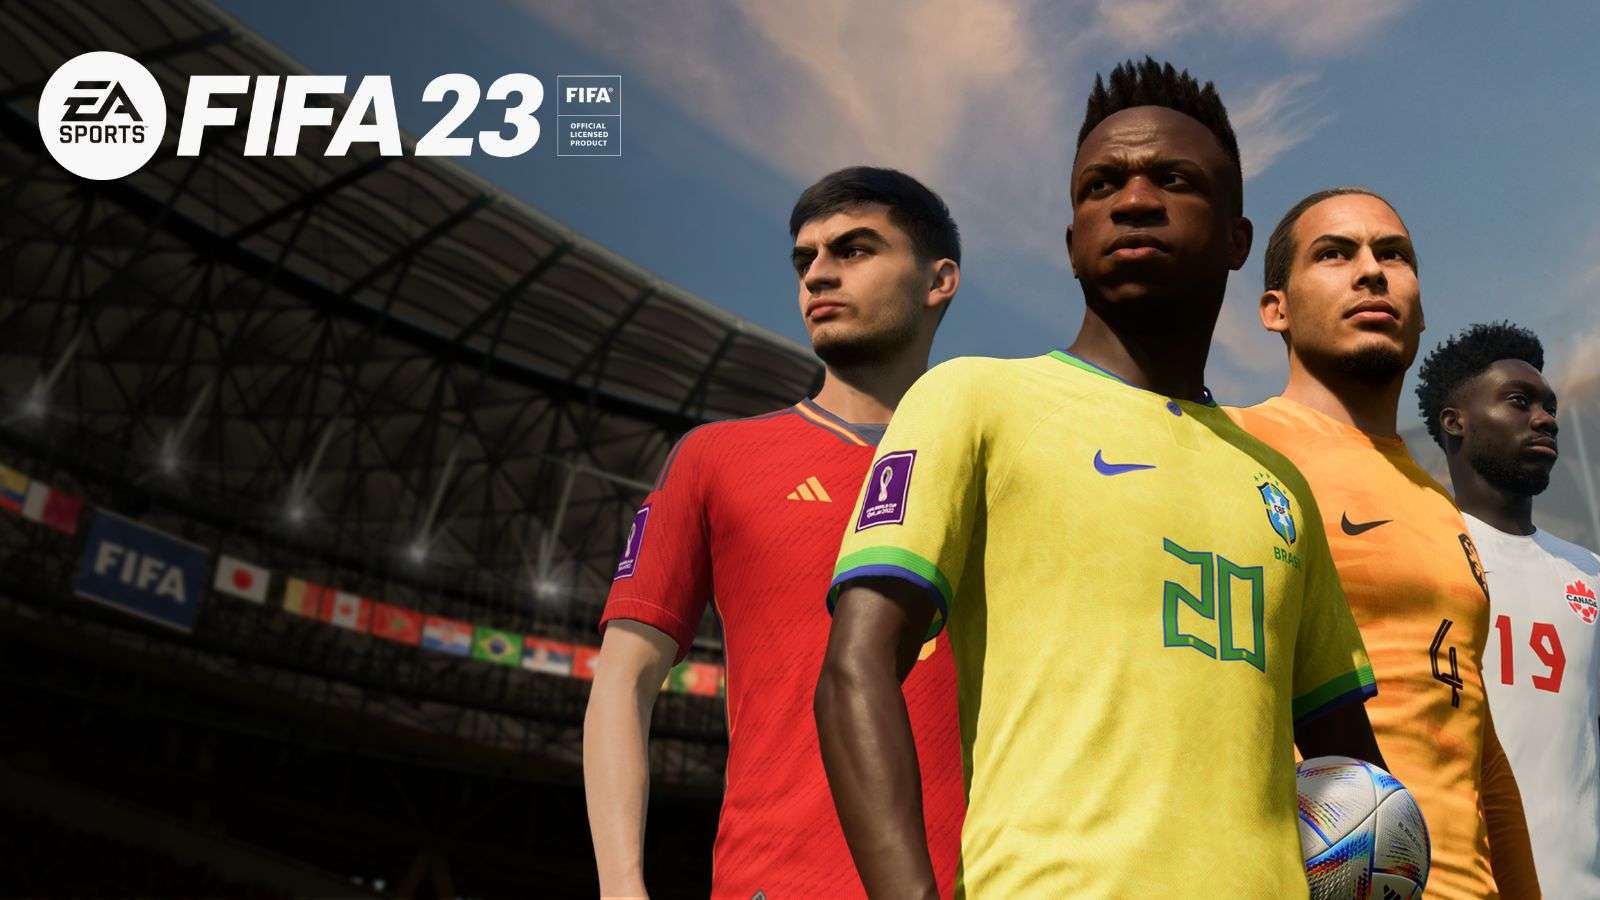 World Cup 2022: EA Sports simulation gives Argentina the World Cup